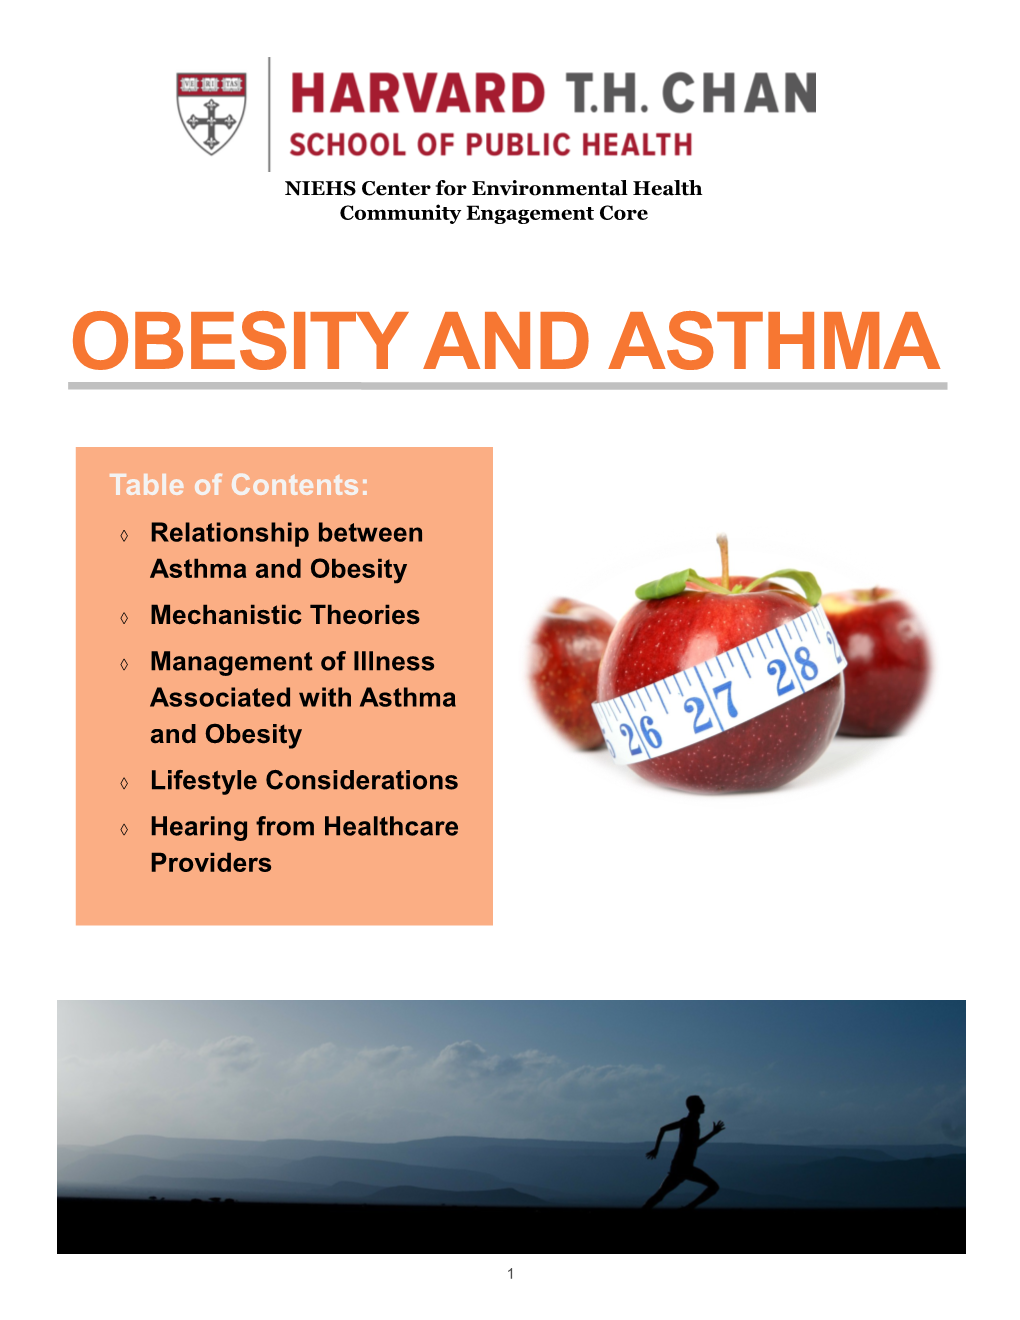 Obesity and Asthma